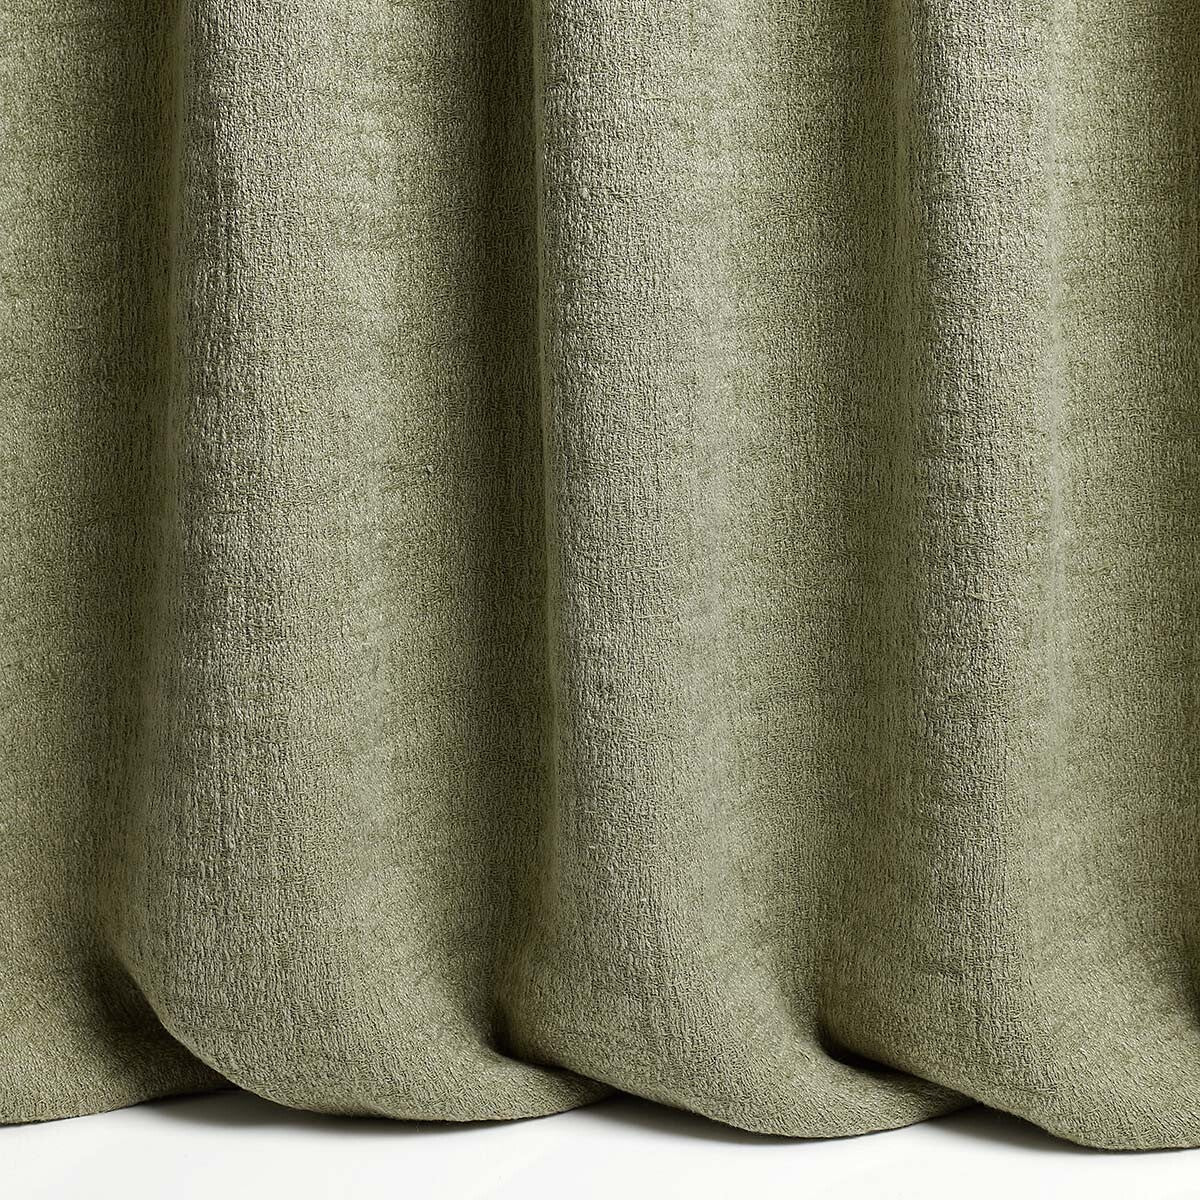 Vivace fabric in 3 color - pattern LZ-30409.03.0 - by Kravet Couture in the Lizzo collection